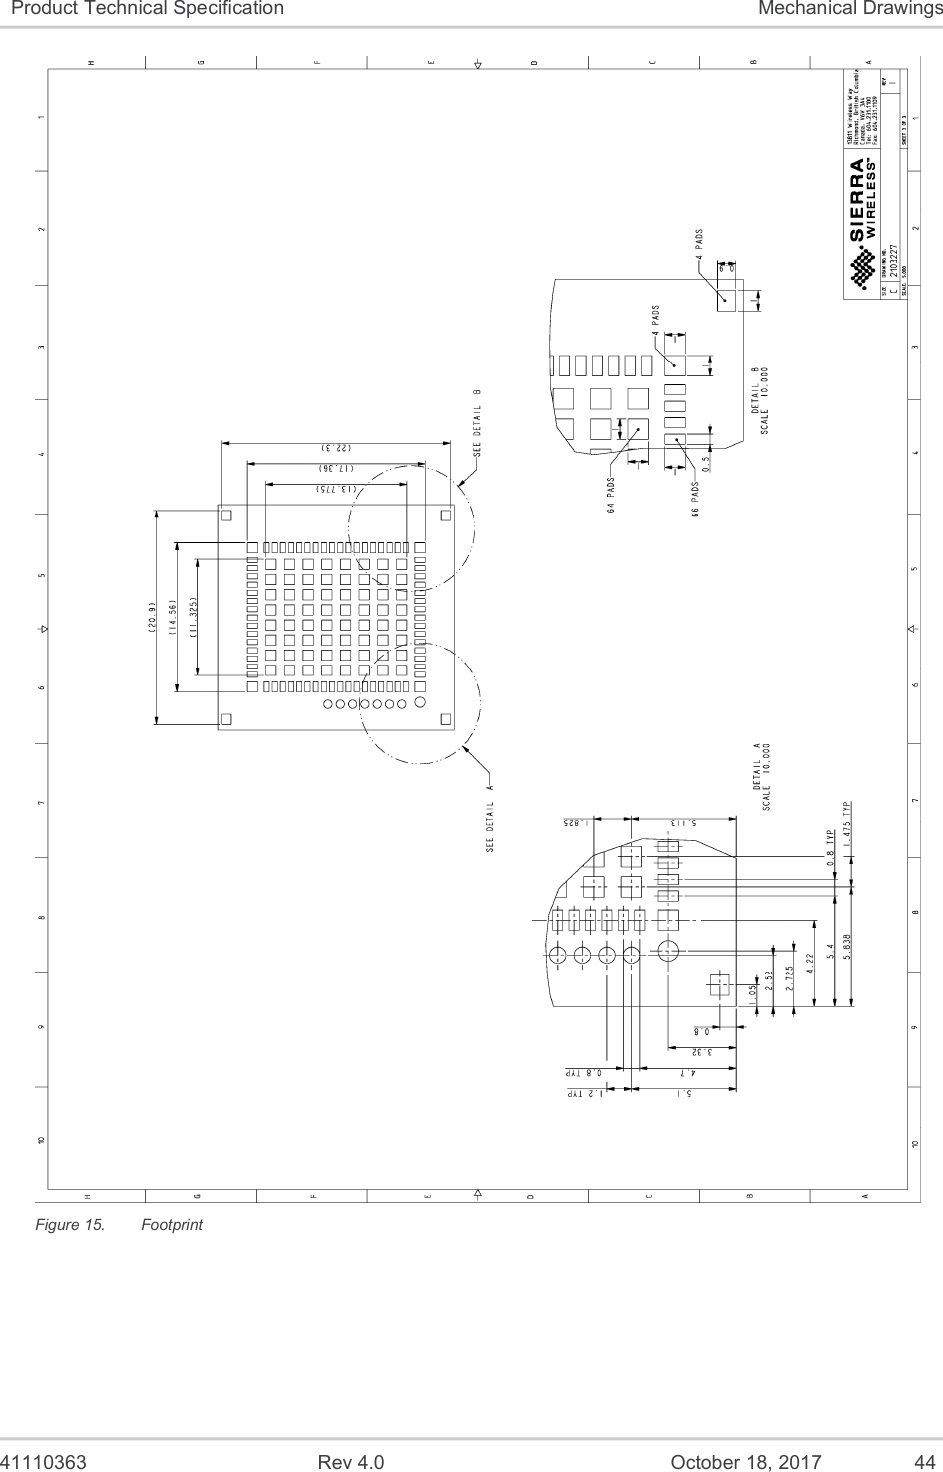   41110363  Rev 4.0  October 18, 2017  44 Product Technical Specification  Mechanical Drawings  Figure 15.  Footprint   